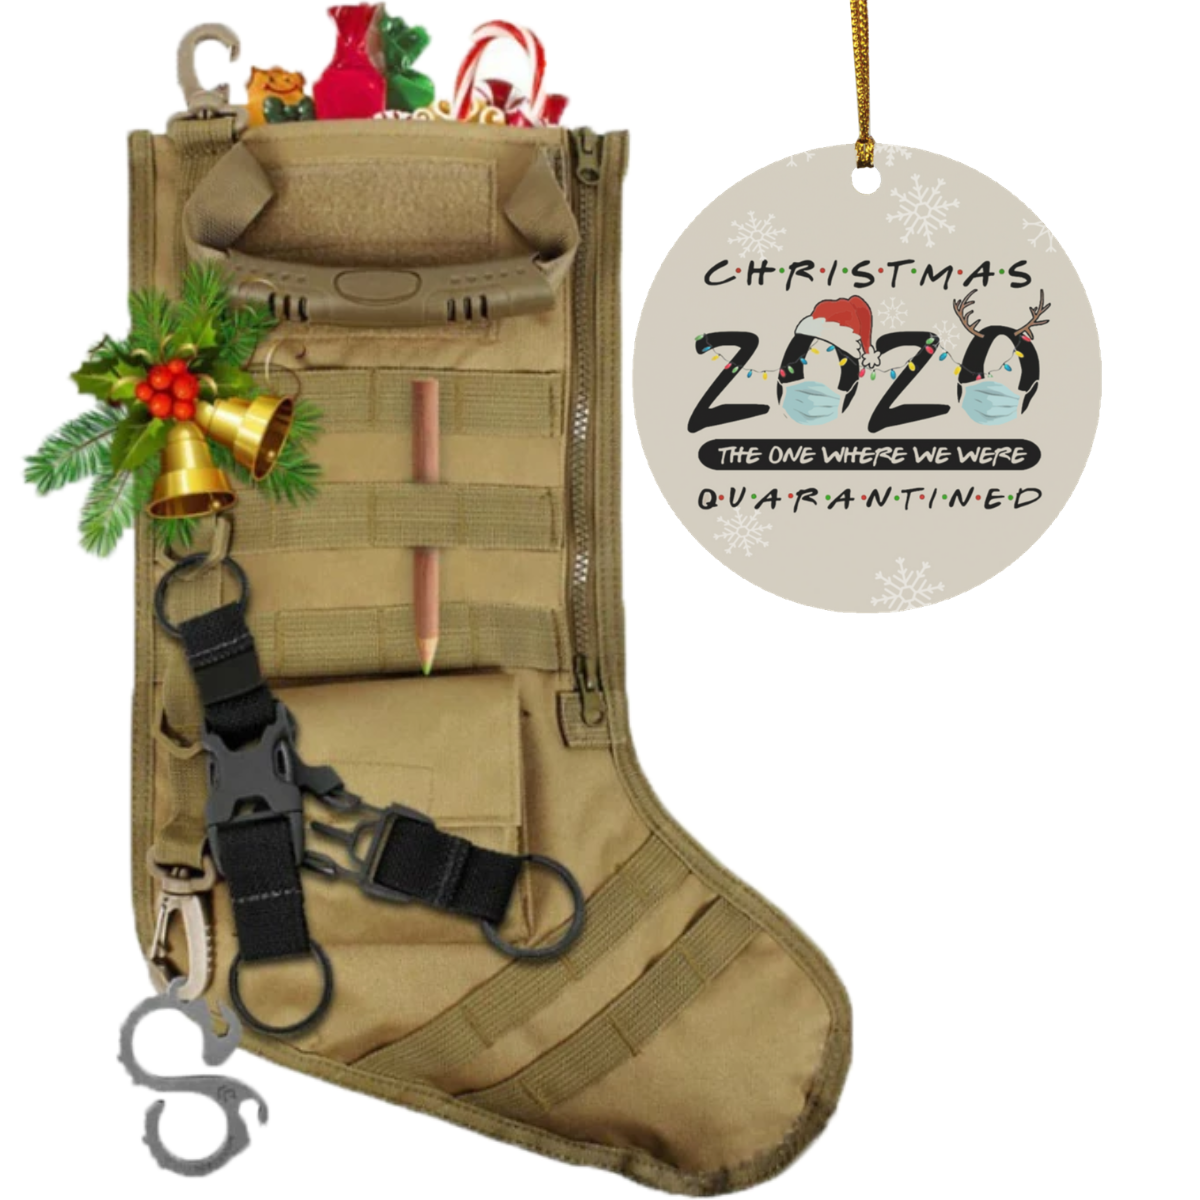 Tactical Xmas Stocking - Family Xmas Stockings with Christmas 2020 The One Where We Were Quarantined Ornament